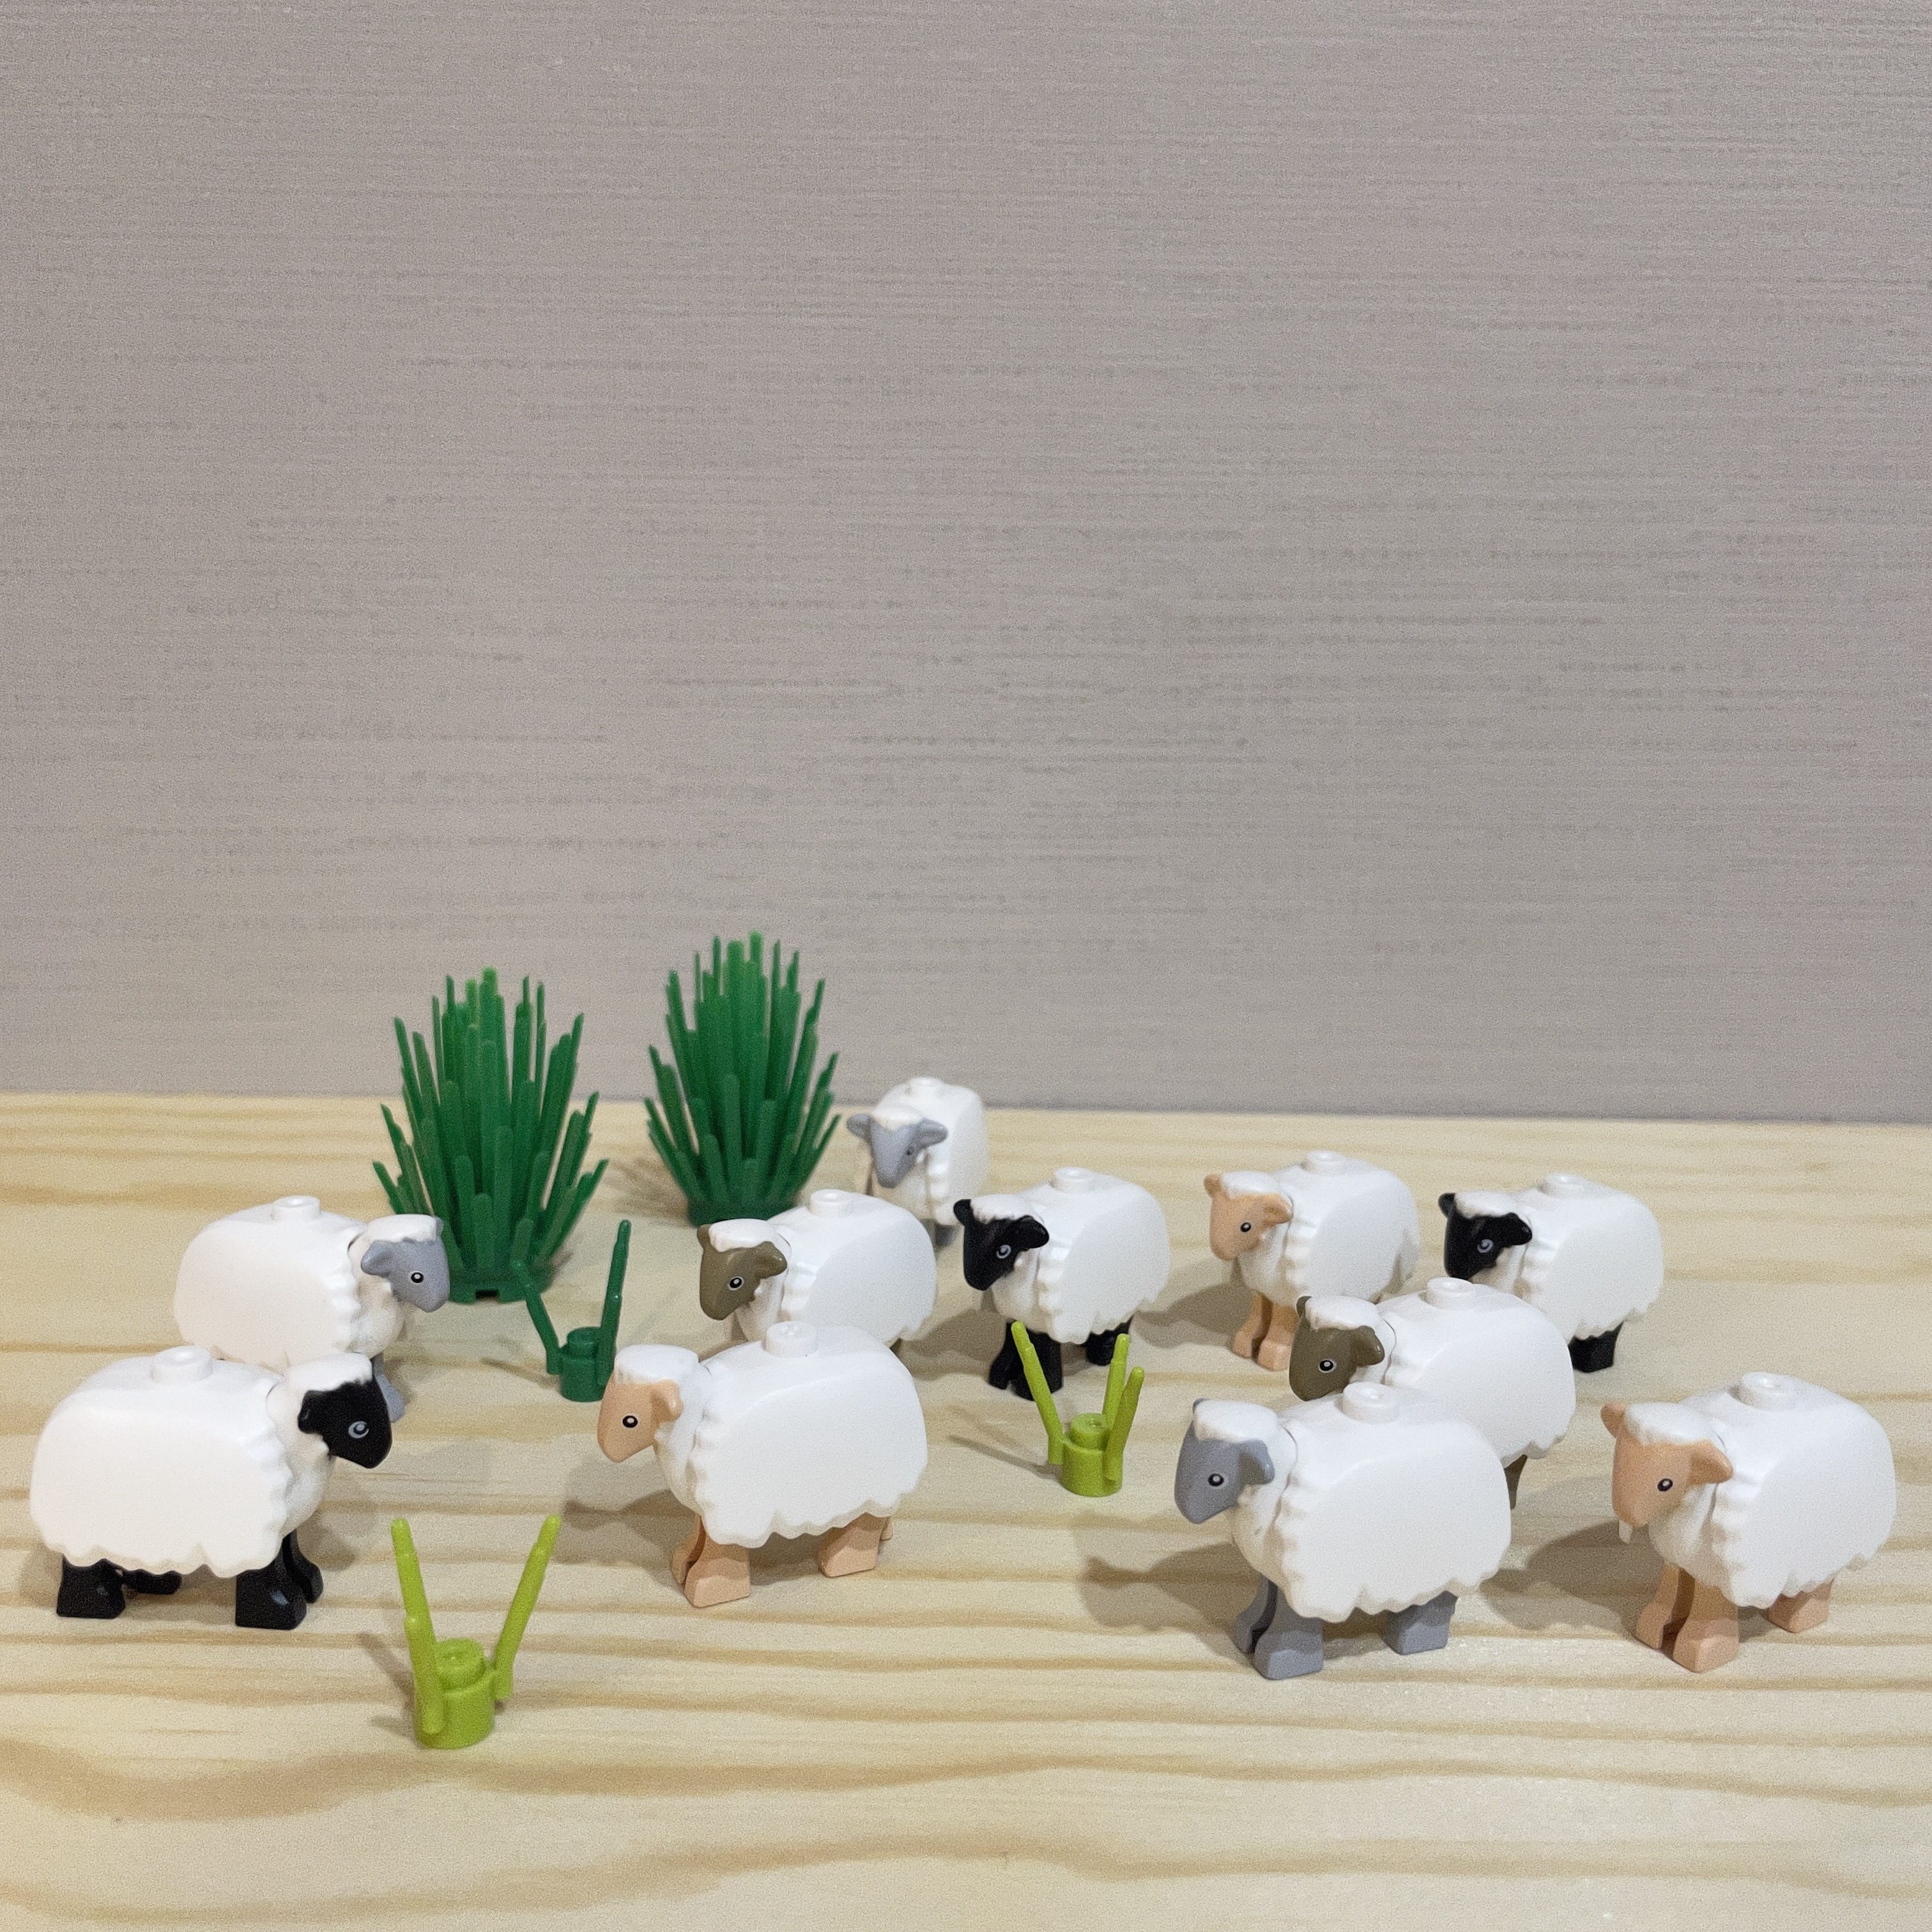 

8pcs Cute Sheep Scene Building Blocks Set For Kids, Moc Compatible Mini Diy Construction Toy, Fun Stackable Animal Figures, Educational Playset For Ages 6-8, Safe Abs Material